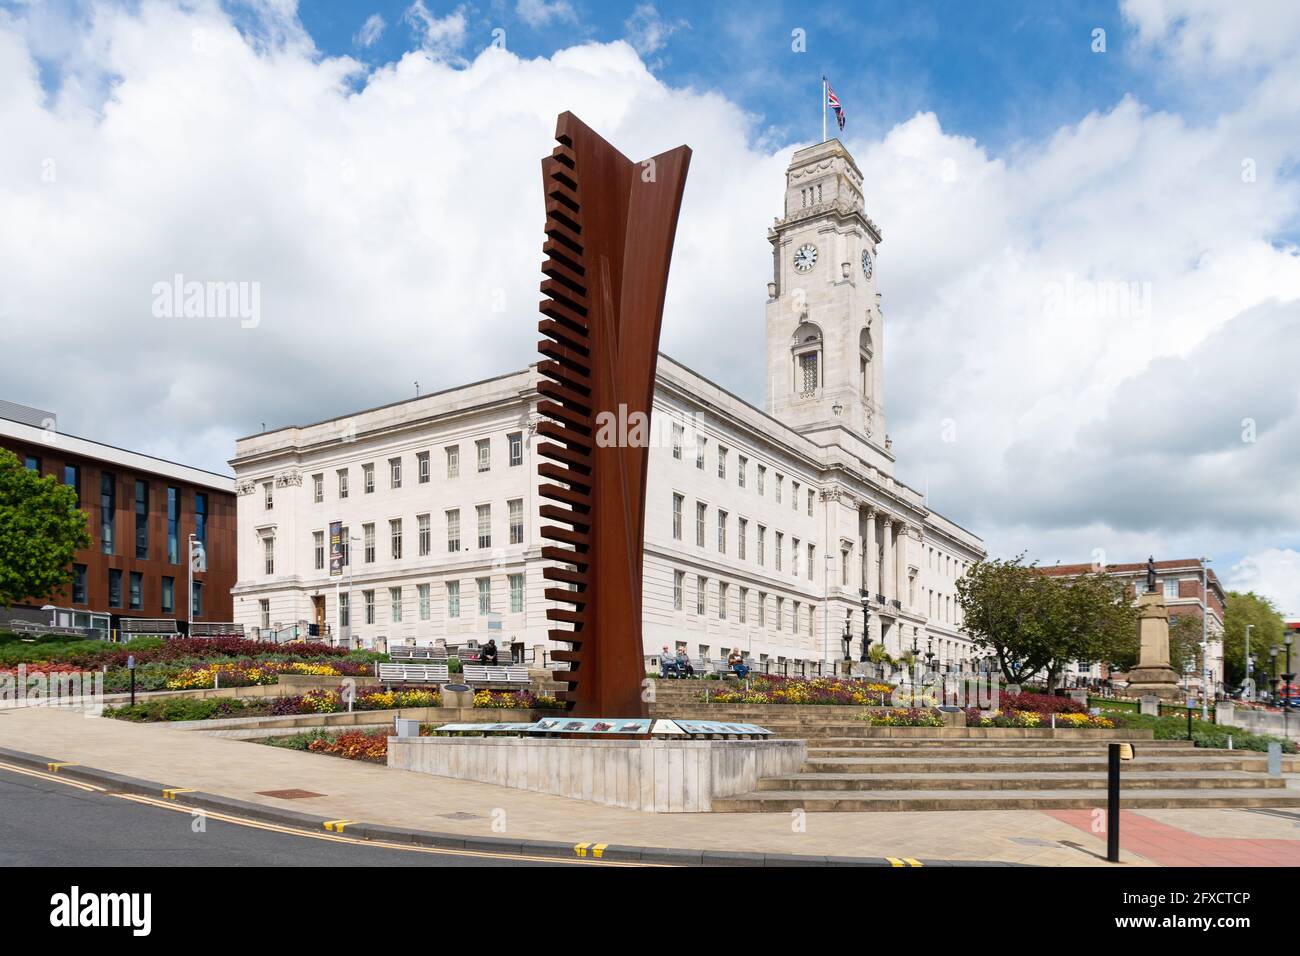 Barnsley Town Hall and Crossing (Vertical) Sculpture - Barnsley, South Yorkshire, England, UK Stockfoto